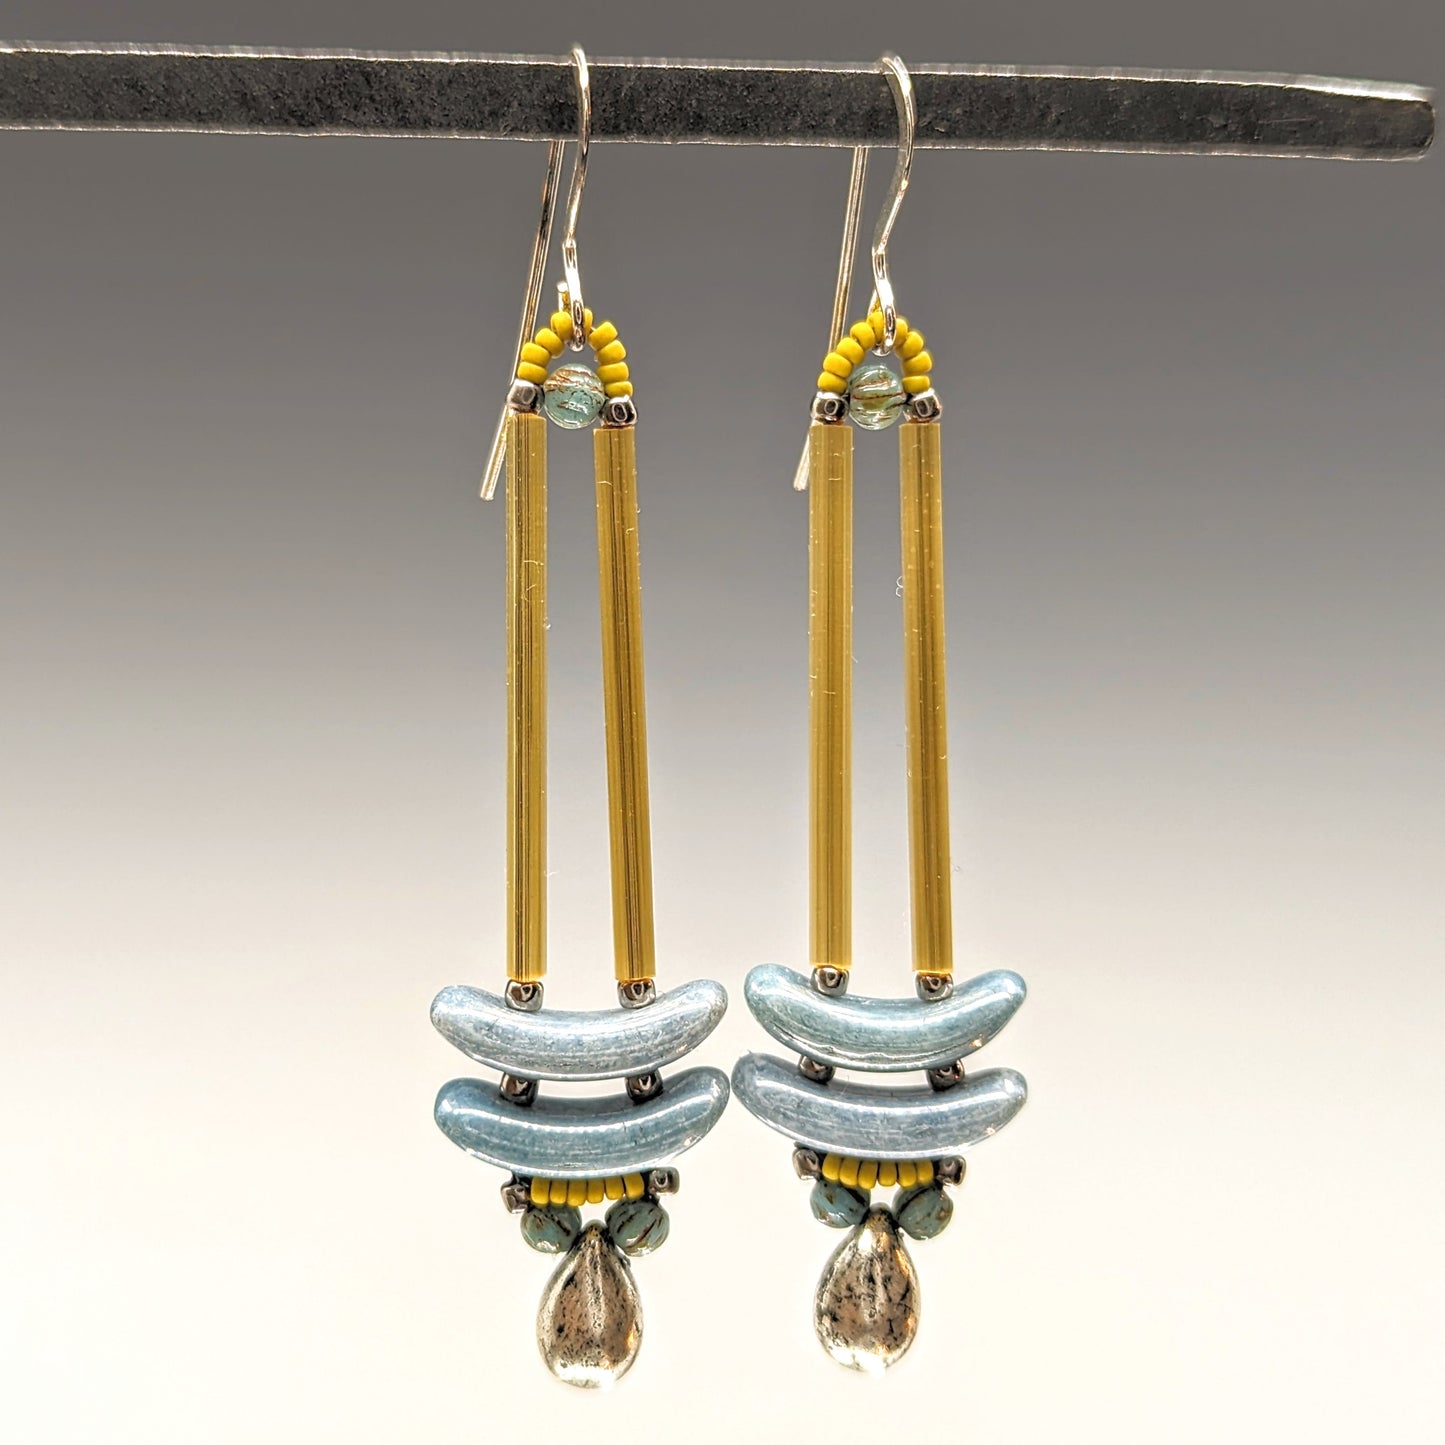 Earrings that look similar to a medicine dropper hang from a black bar. There are two long, yellow-gold beads forming narrow vertical columns ending at the top of two pale blue stacked arc shaped beads. At the bottom is a silver drop shaped bead between two turquoise rounds, all surrounded by a belt of mustard yellow seed beads.